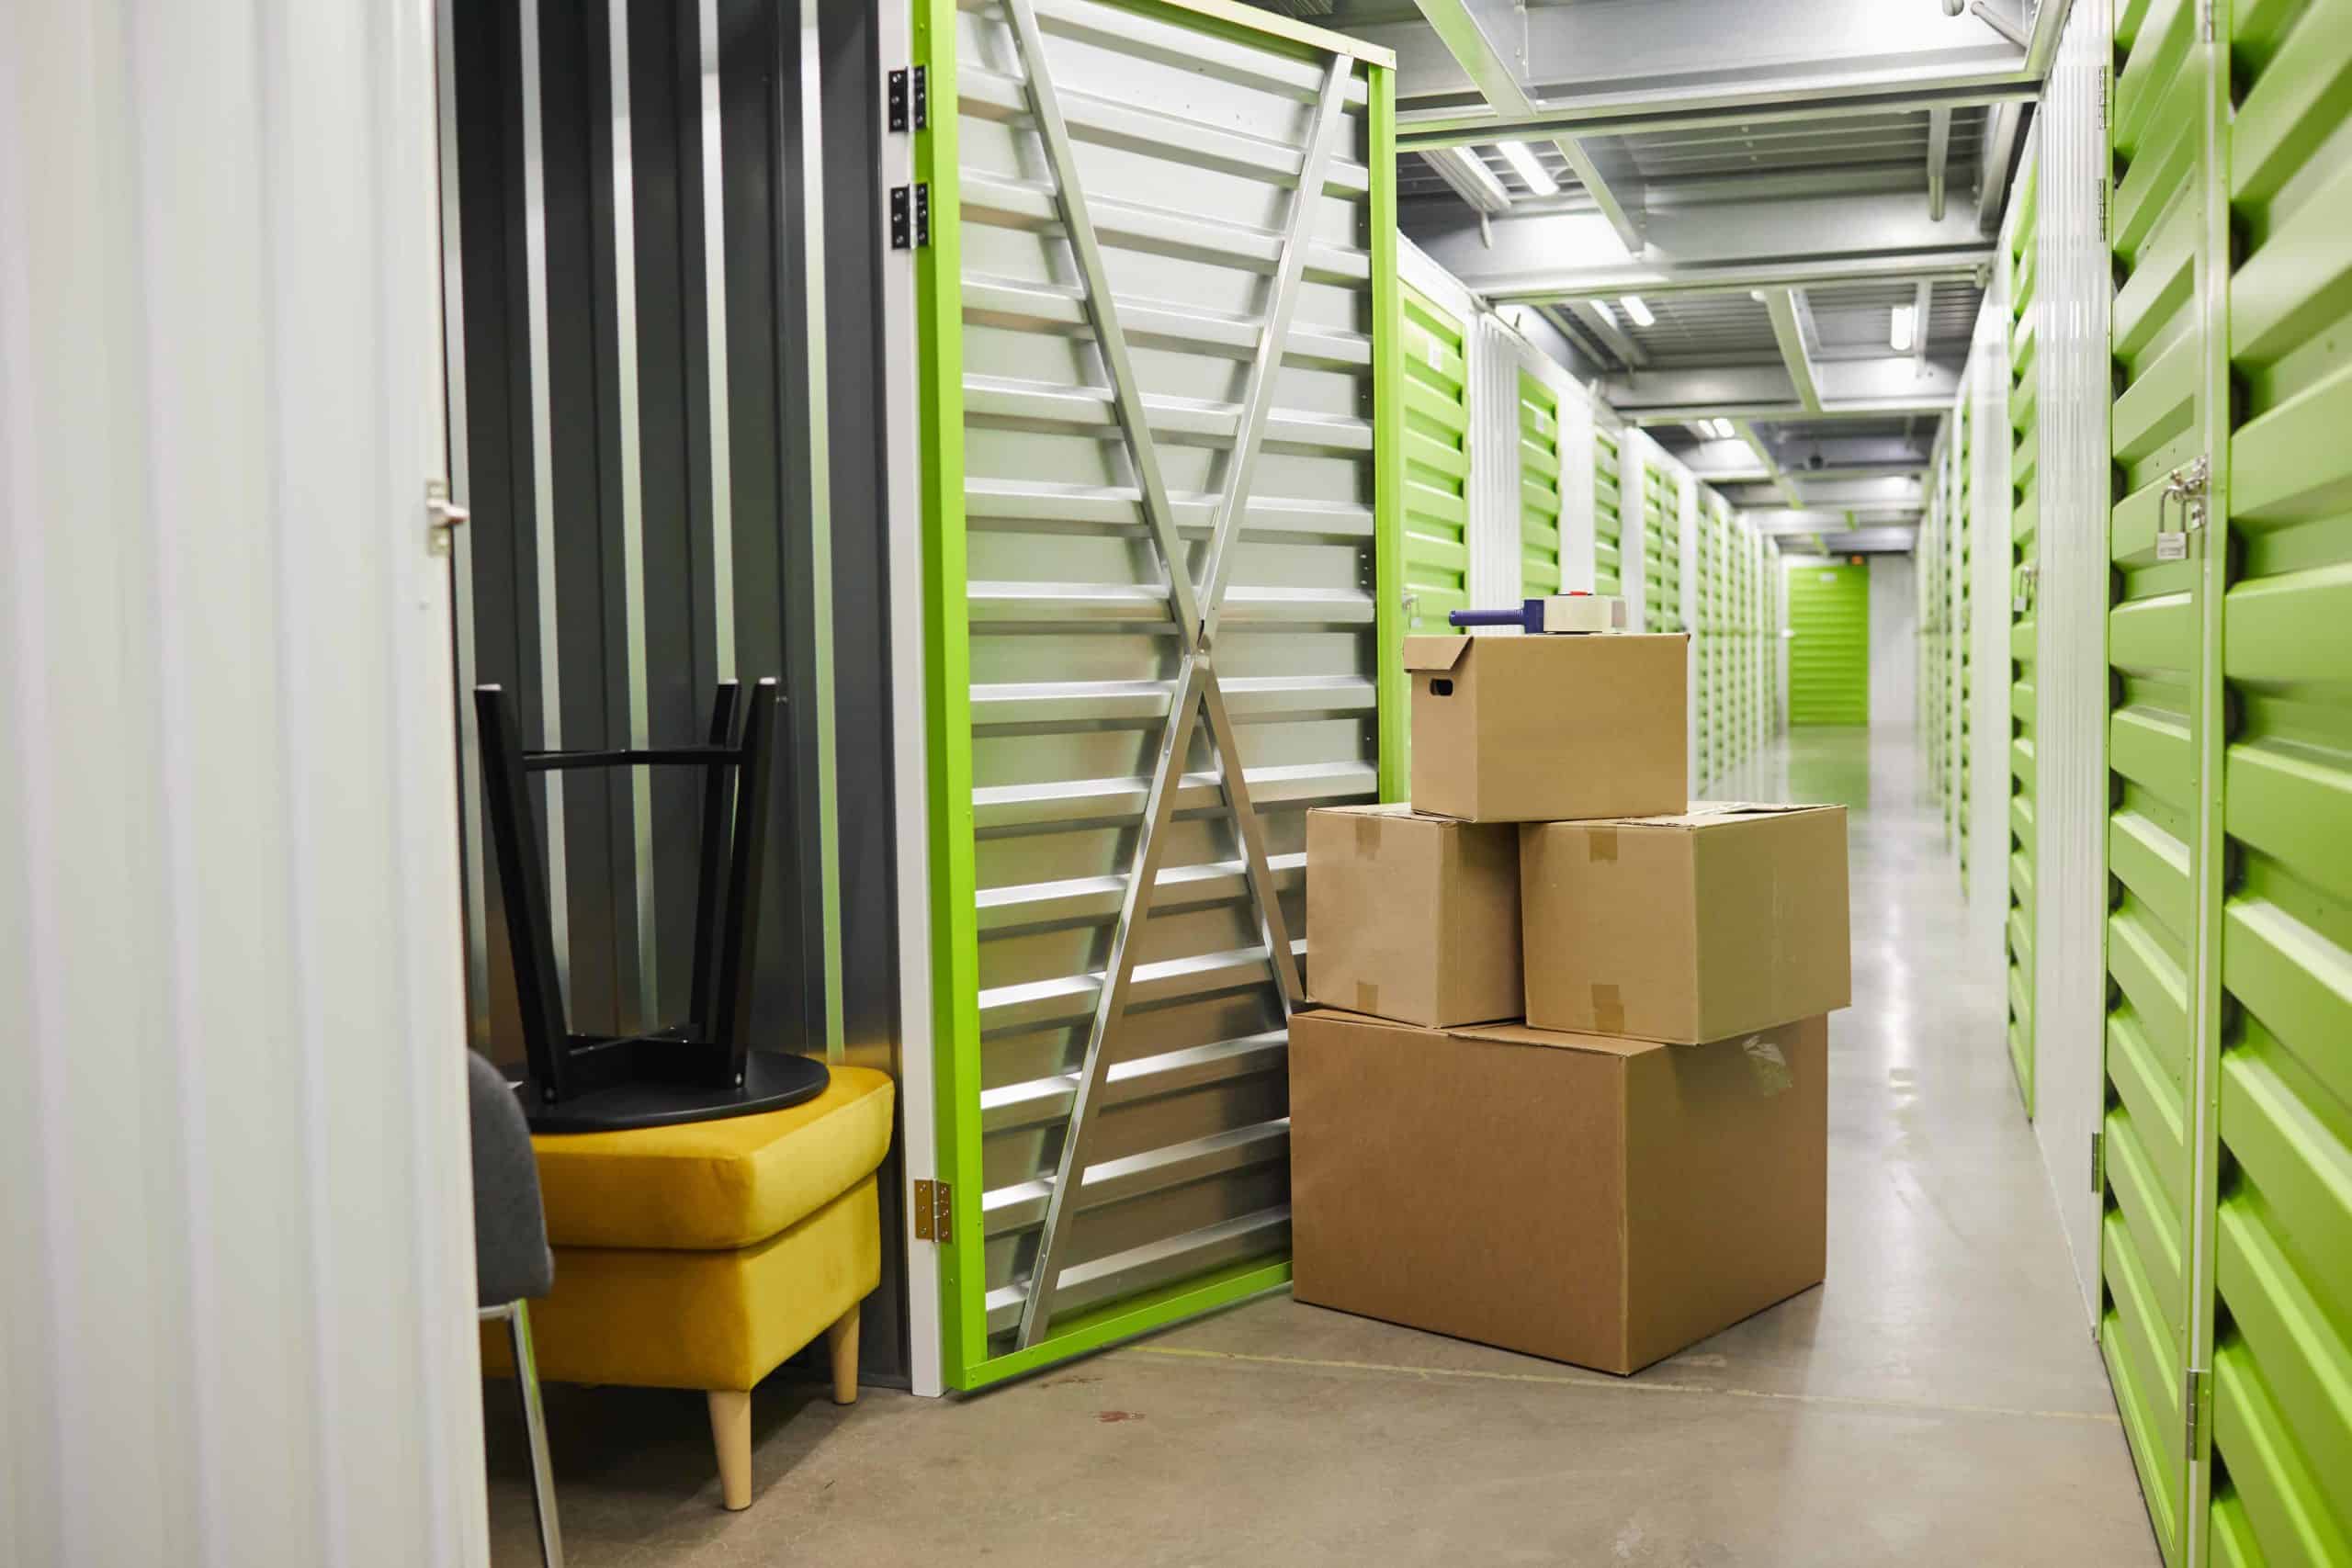 The Advantages Of Using Self-Storage Units - Moving Home Made Easy